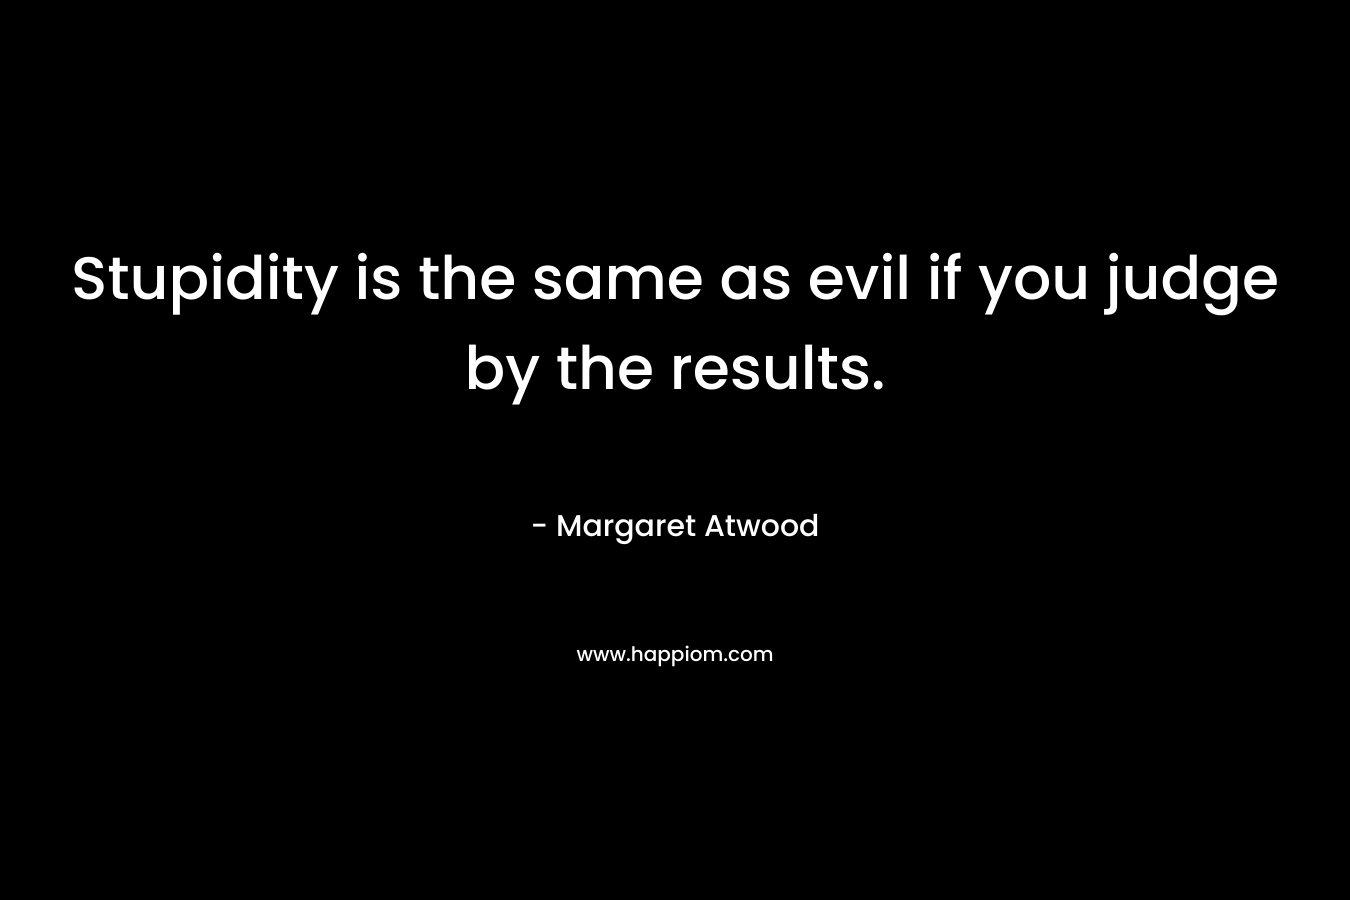 Stupidity is the same as evil if you judge by the results.